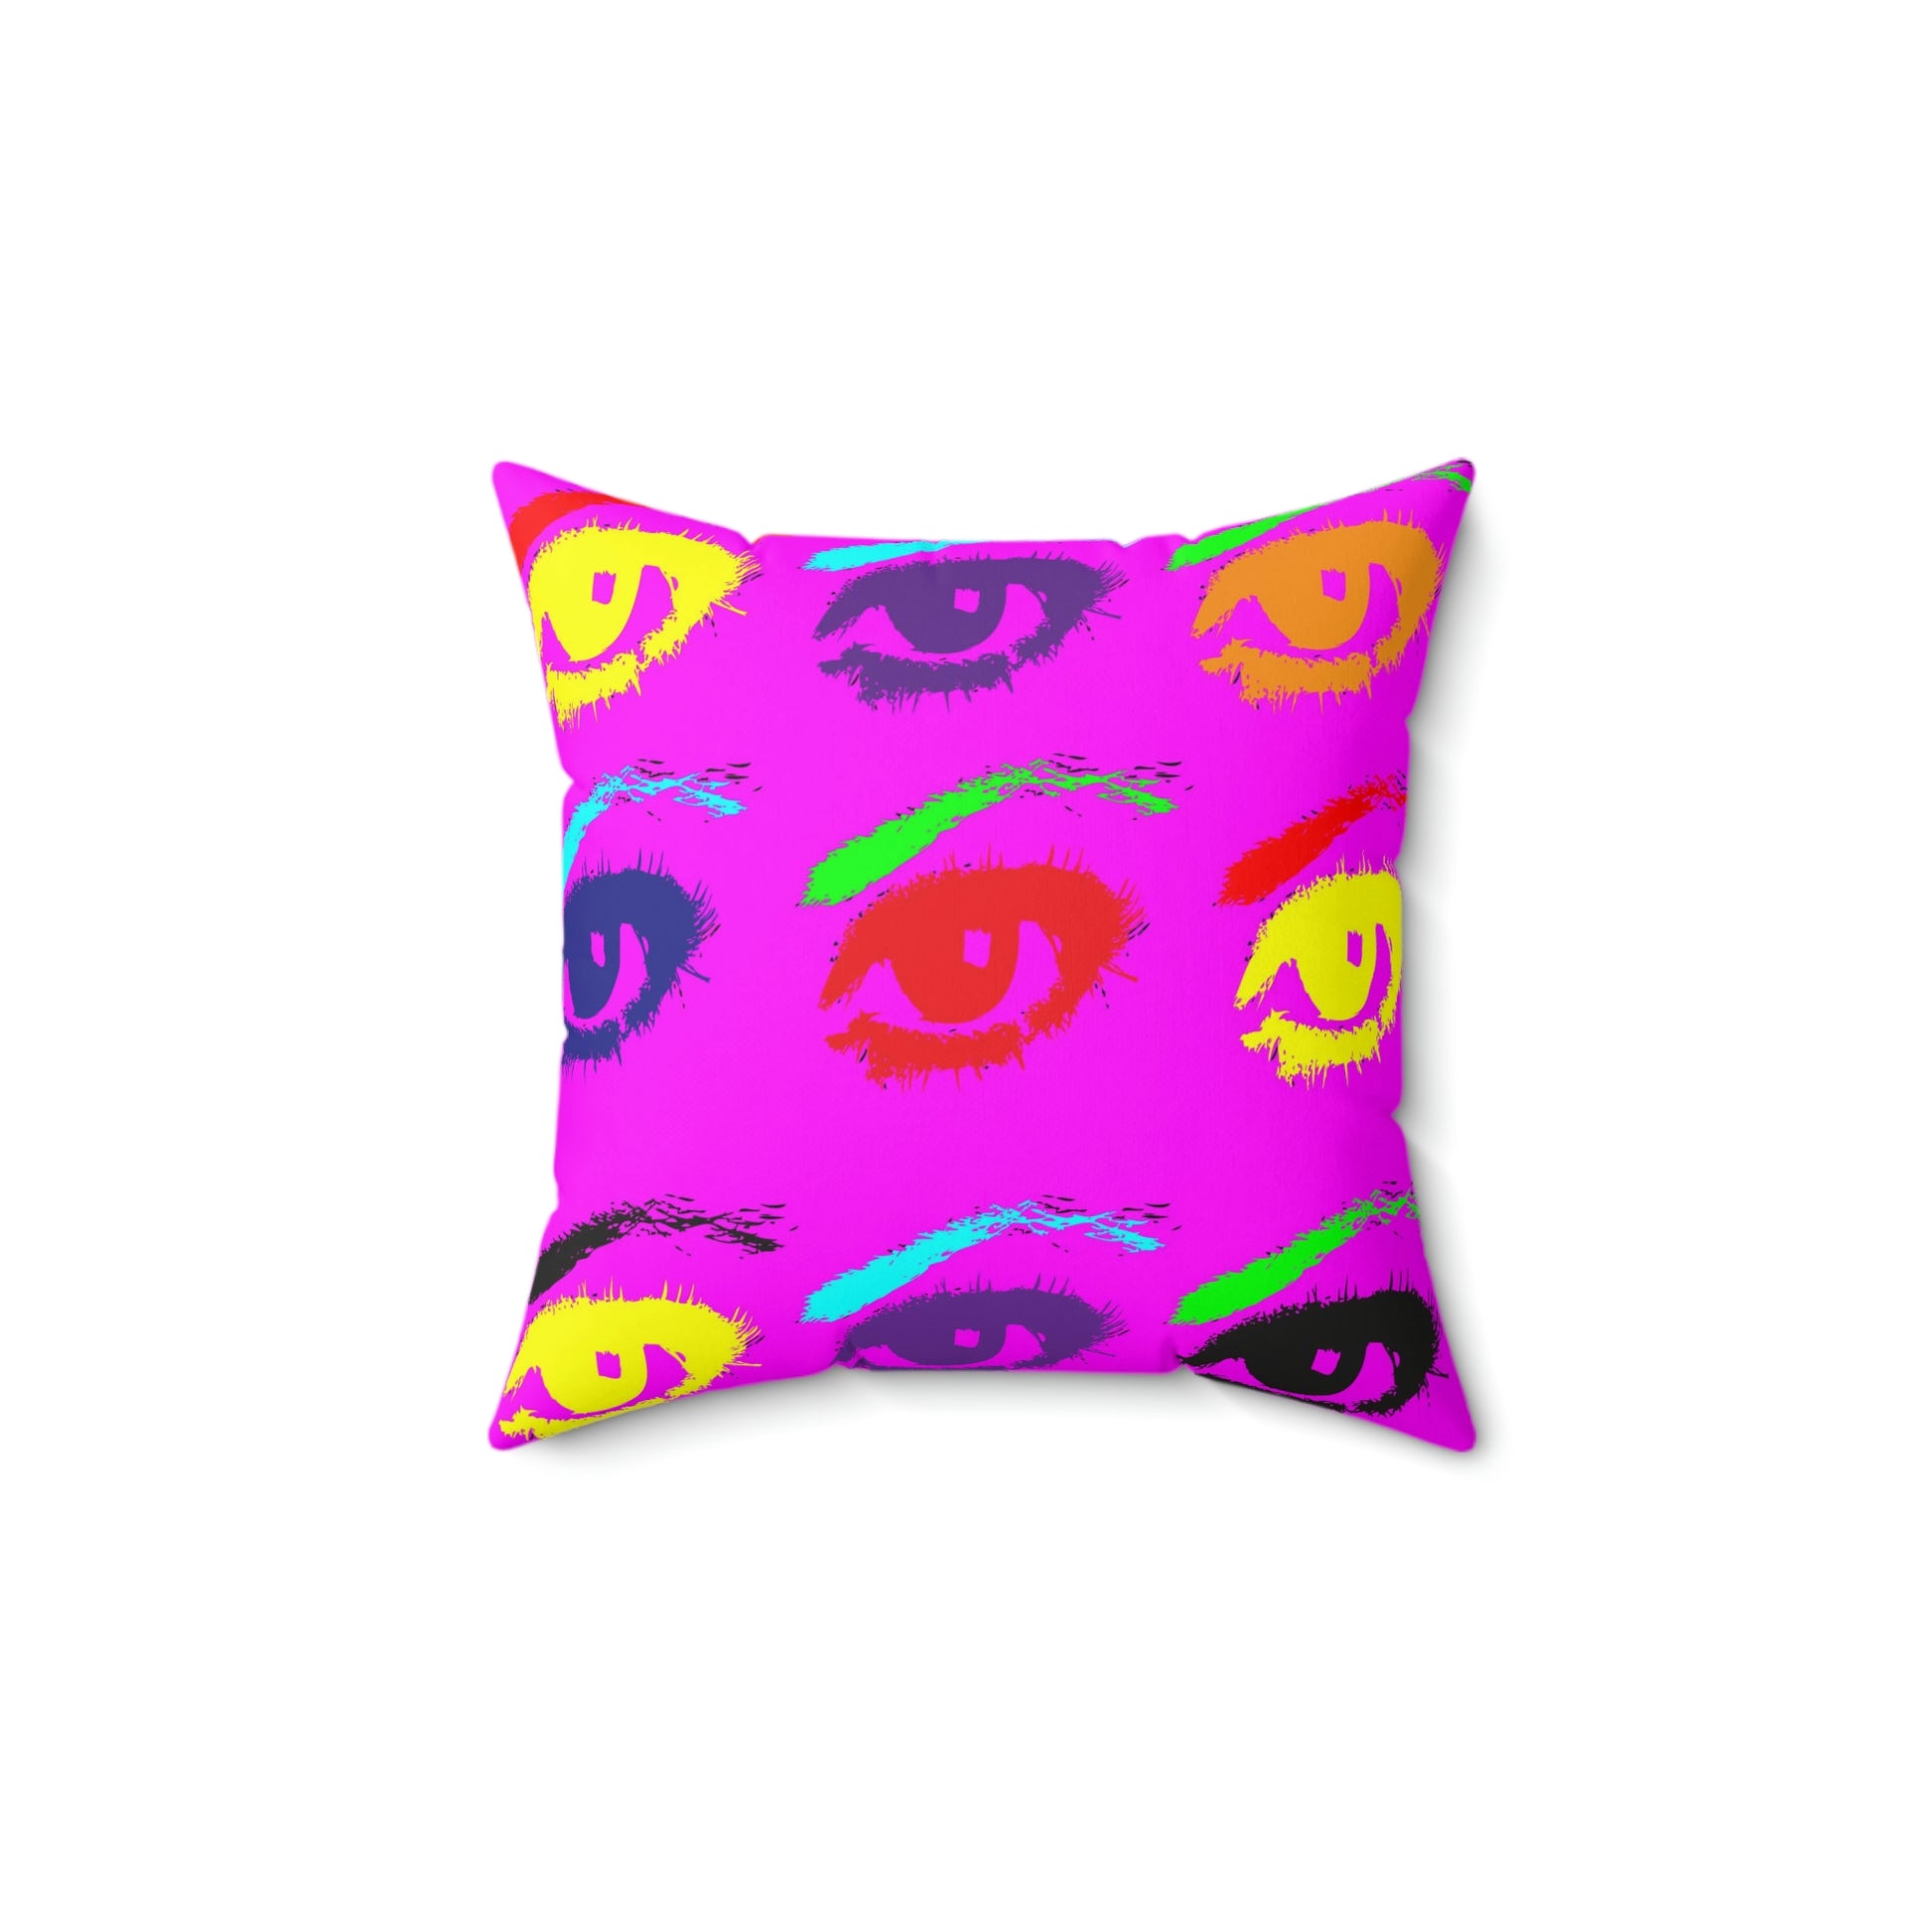 Geotrott Pink Warhol Style Eyes Art Multy Colored Eyes Grid Spun Polyester Square Pillow-Home Decor-Geotrott